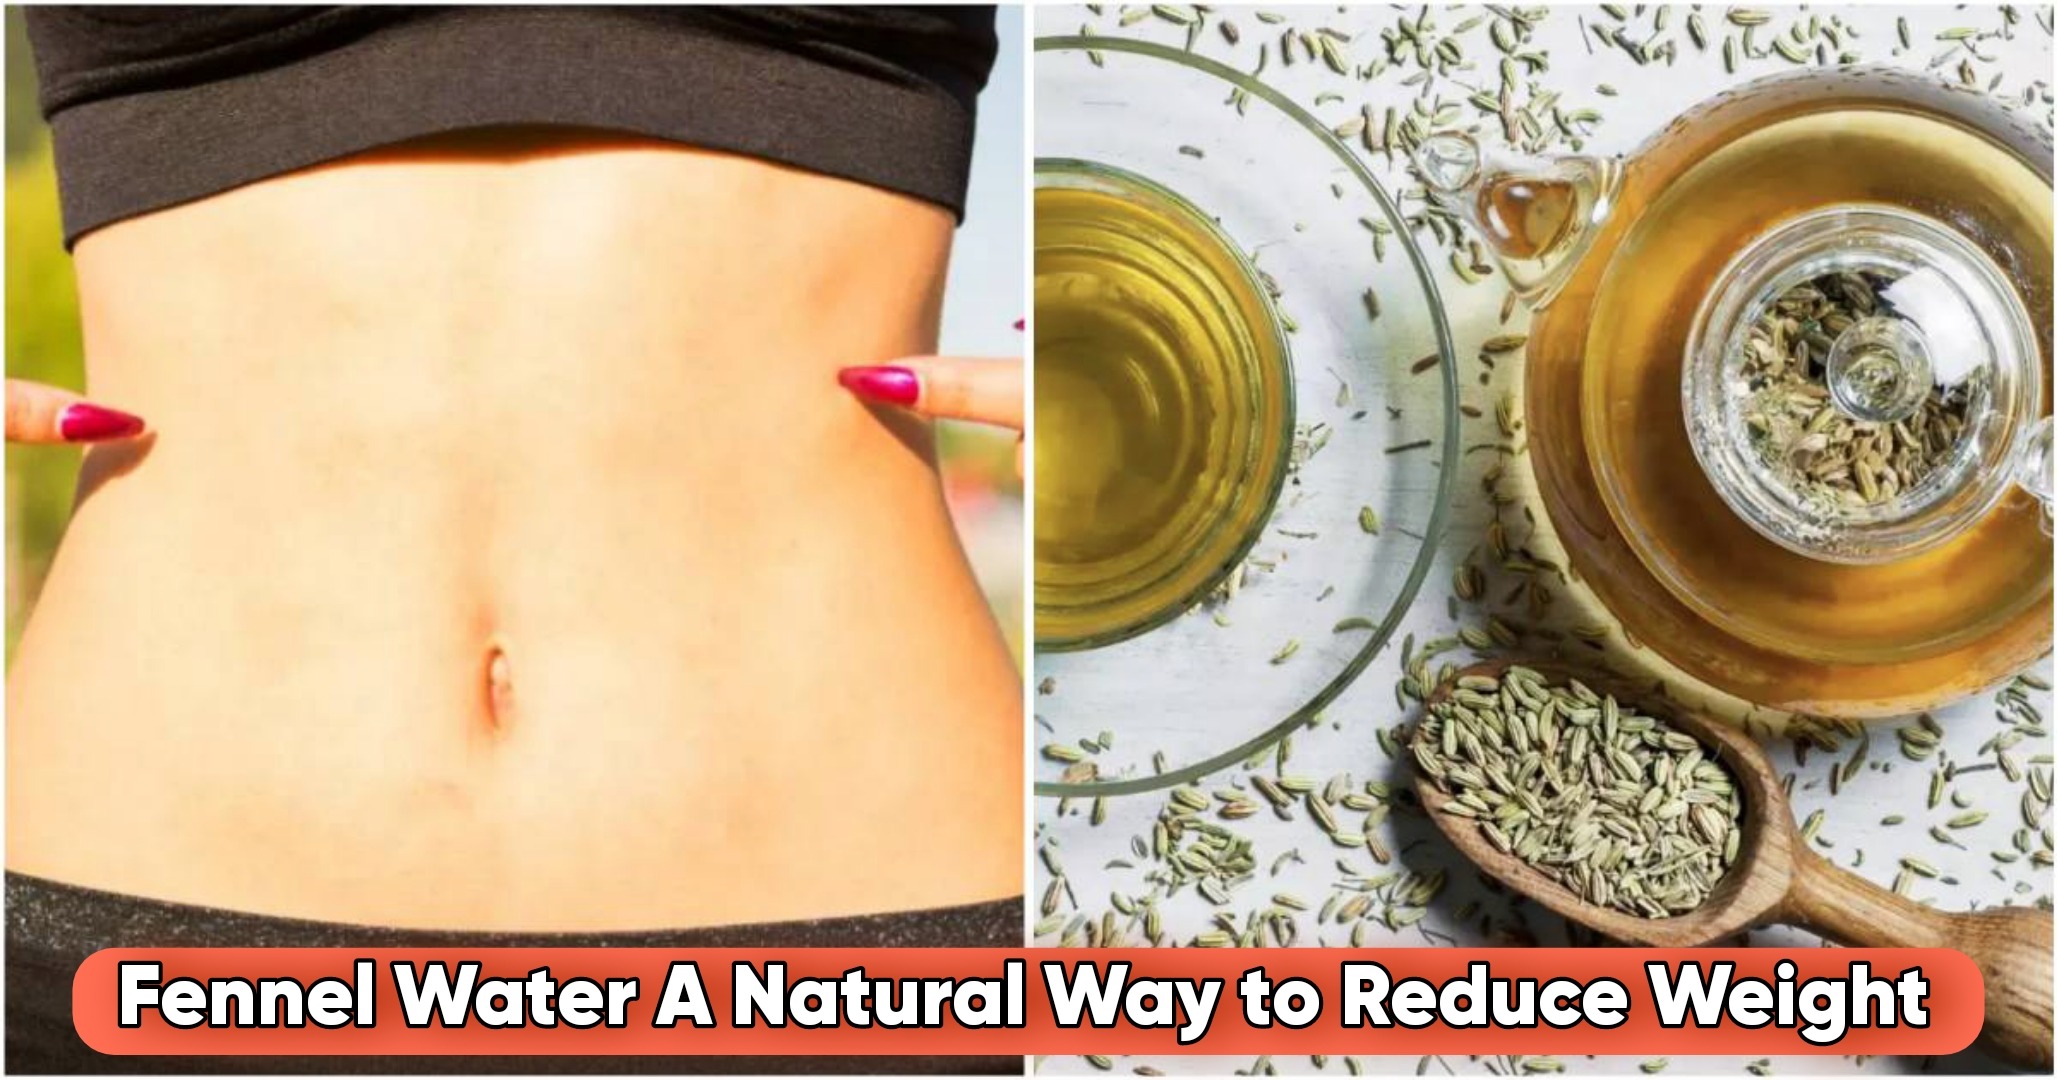 Fennel Water: A Natural Way to Reduce Weight and Improve Digestion